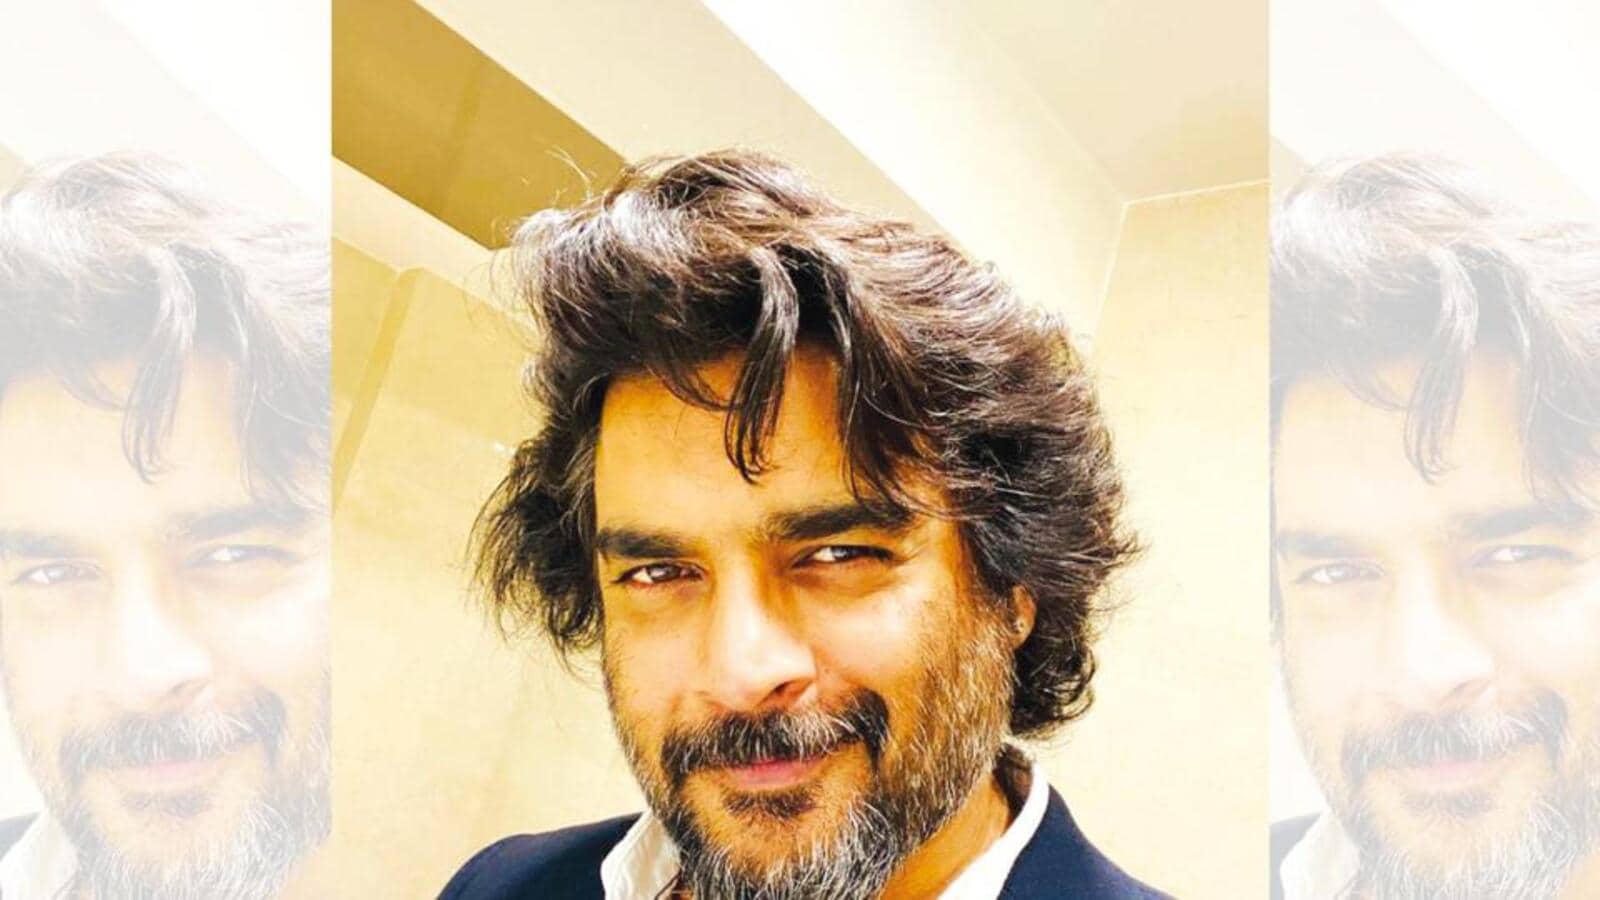 Films: R Madhavan talks about relationships, the society and women’s empowerment